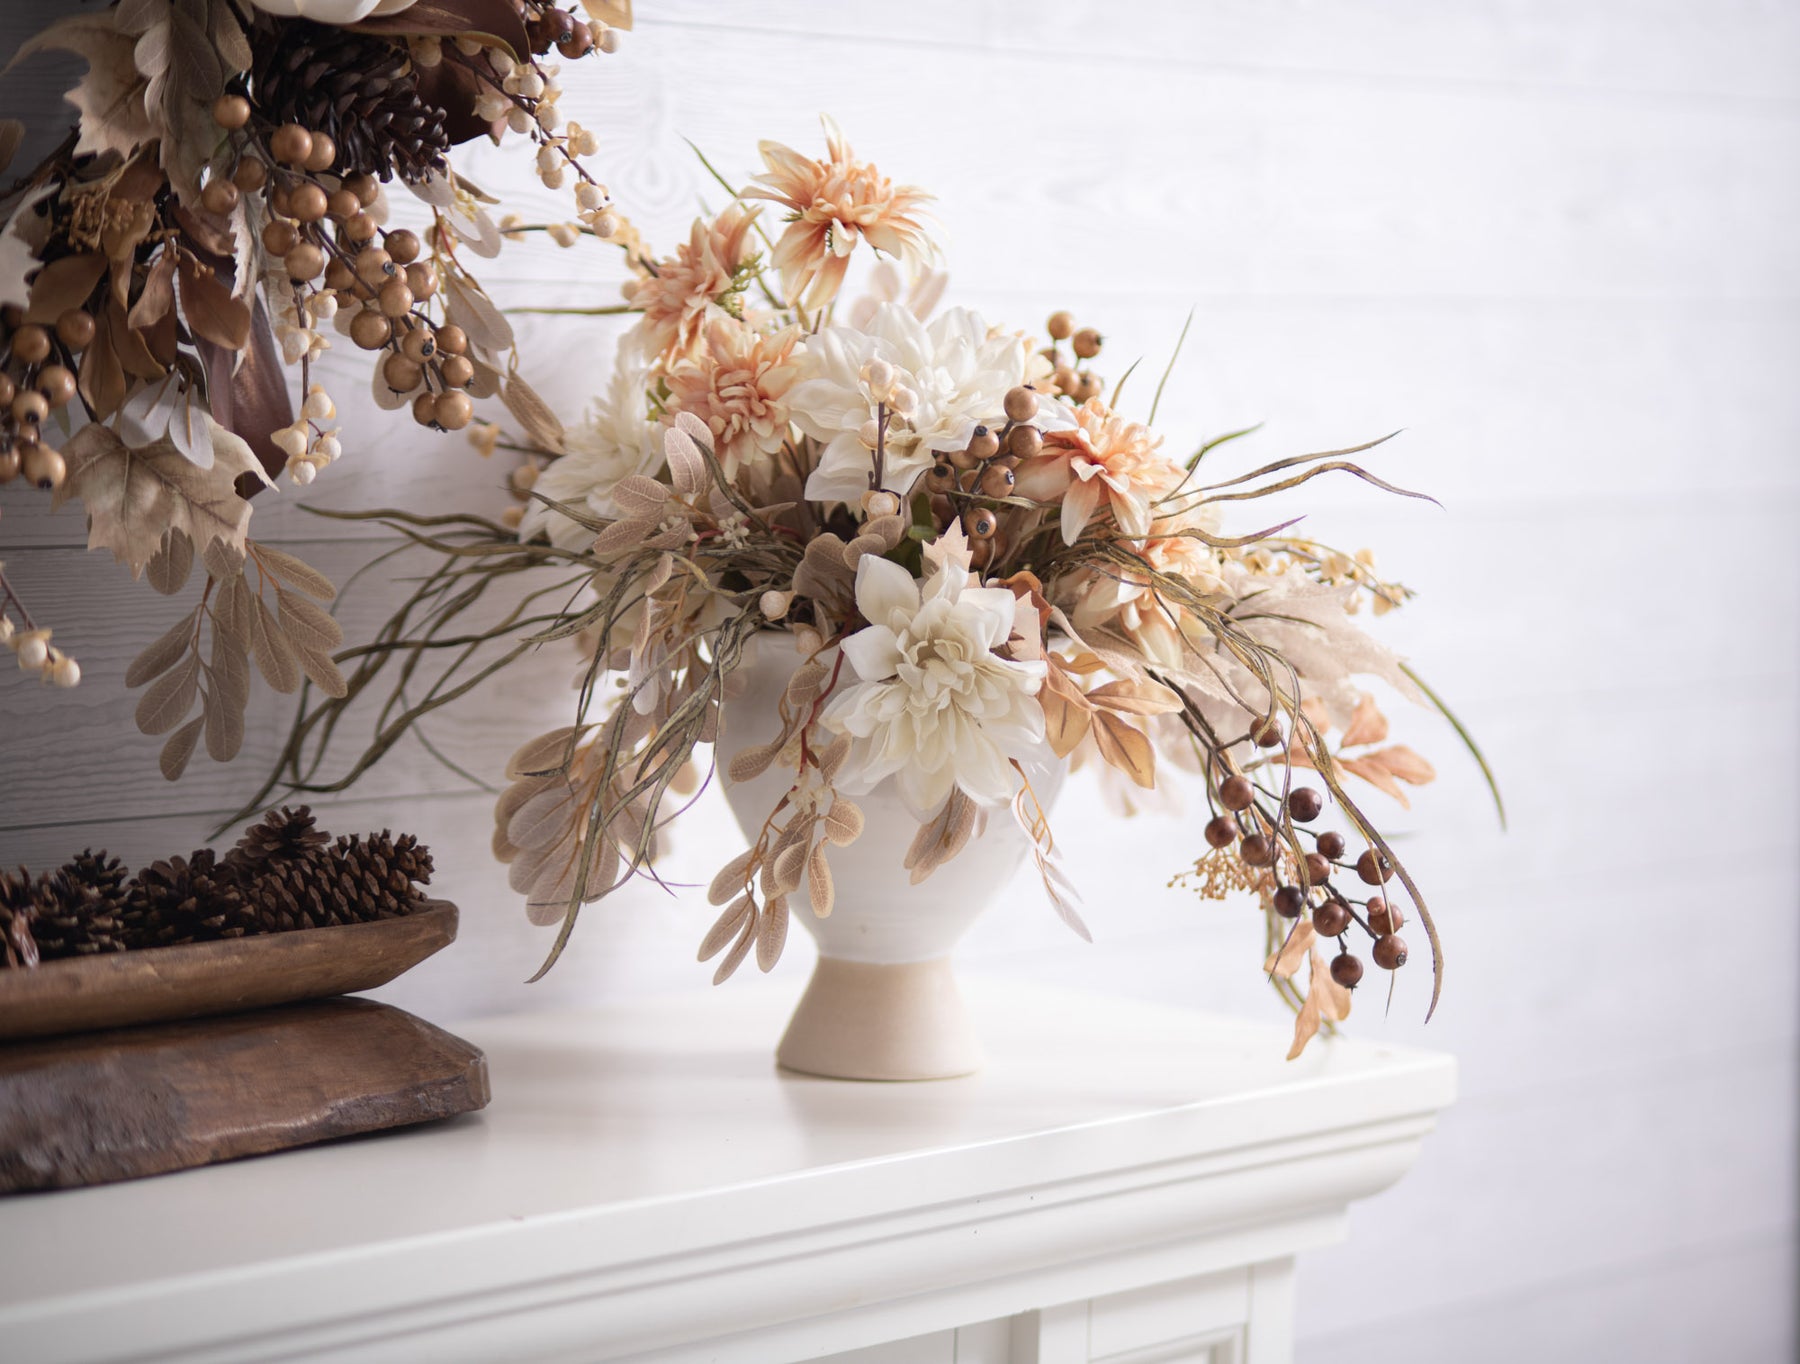 Berry And Twig Floral Arrangements For Fall - Chelsea Flowers